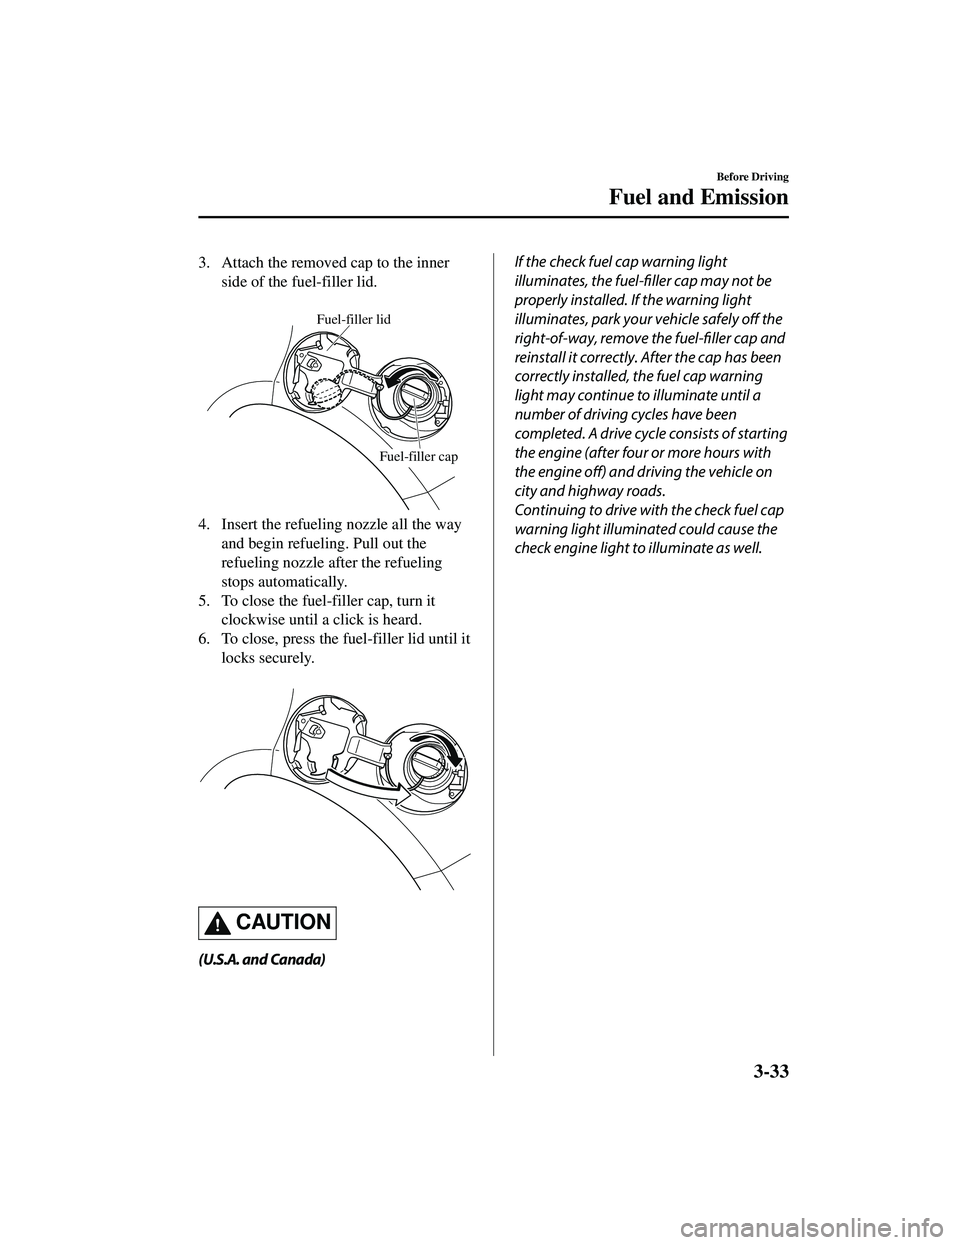 MAZDA MODEL CX-9 2021  Owners Manual 3. Attach the removed cap to the innerside of the fuel-filler lid.
 
Fuel-filler lid
Fuel-filler cap
4. Insert the refueling  nozzle all the way
and begin refueling. Pull out the
refueling nozzle afte